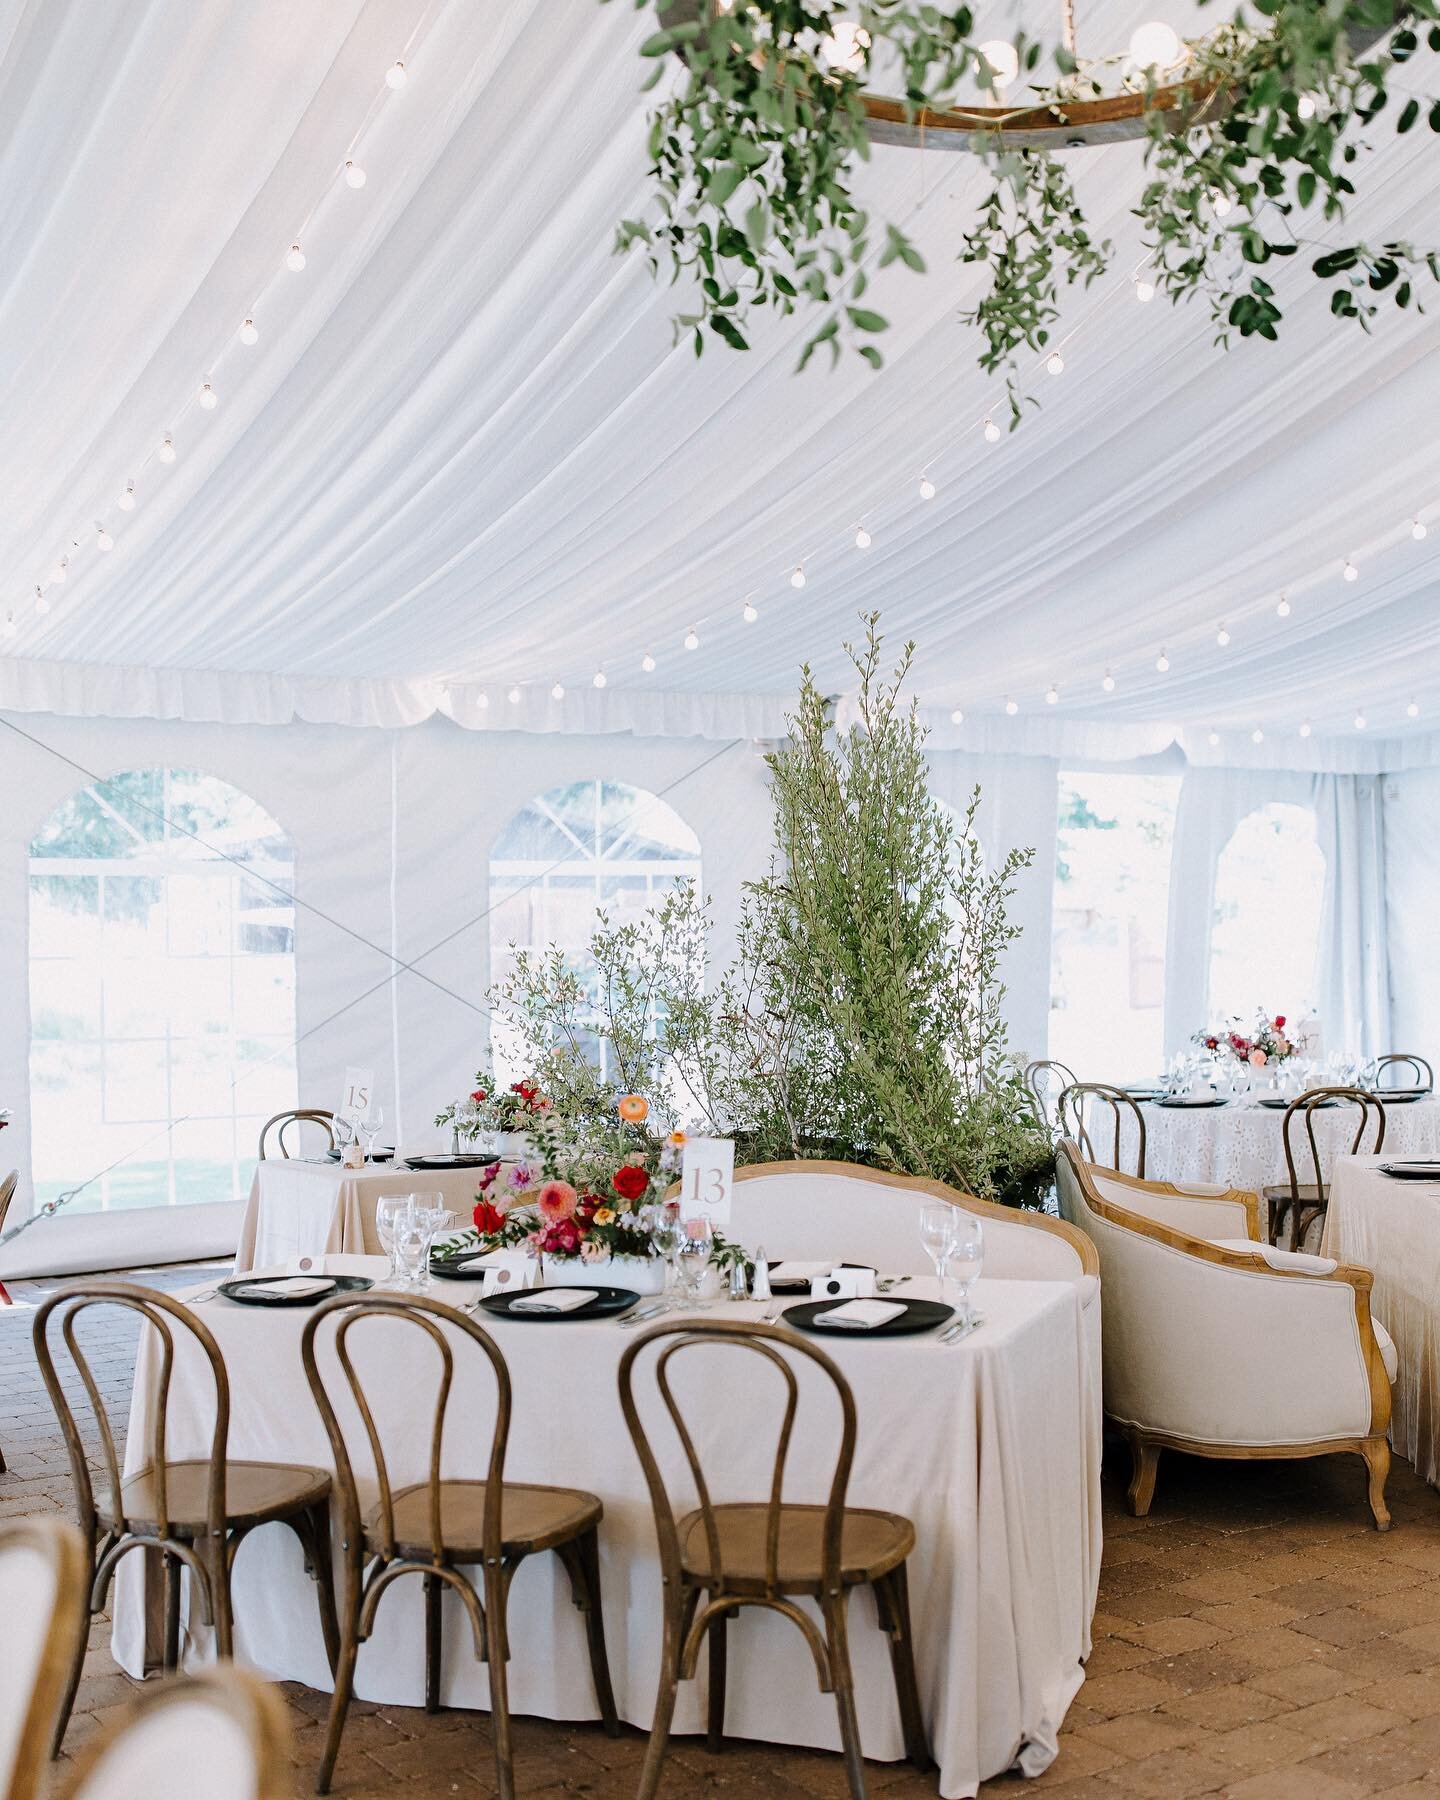 Creative seating options really transformed the layout of Trail Creek&mdash; it allowed for such an elegant and cozy space for guests!  Planning/Design @sproutdesignwedding  Venue- Trail Creek
Floral &ndash; @rustandthistlefloral 
Ceremony Music- New